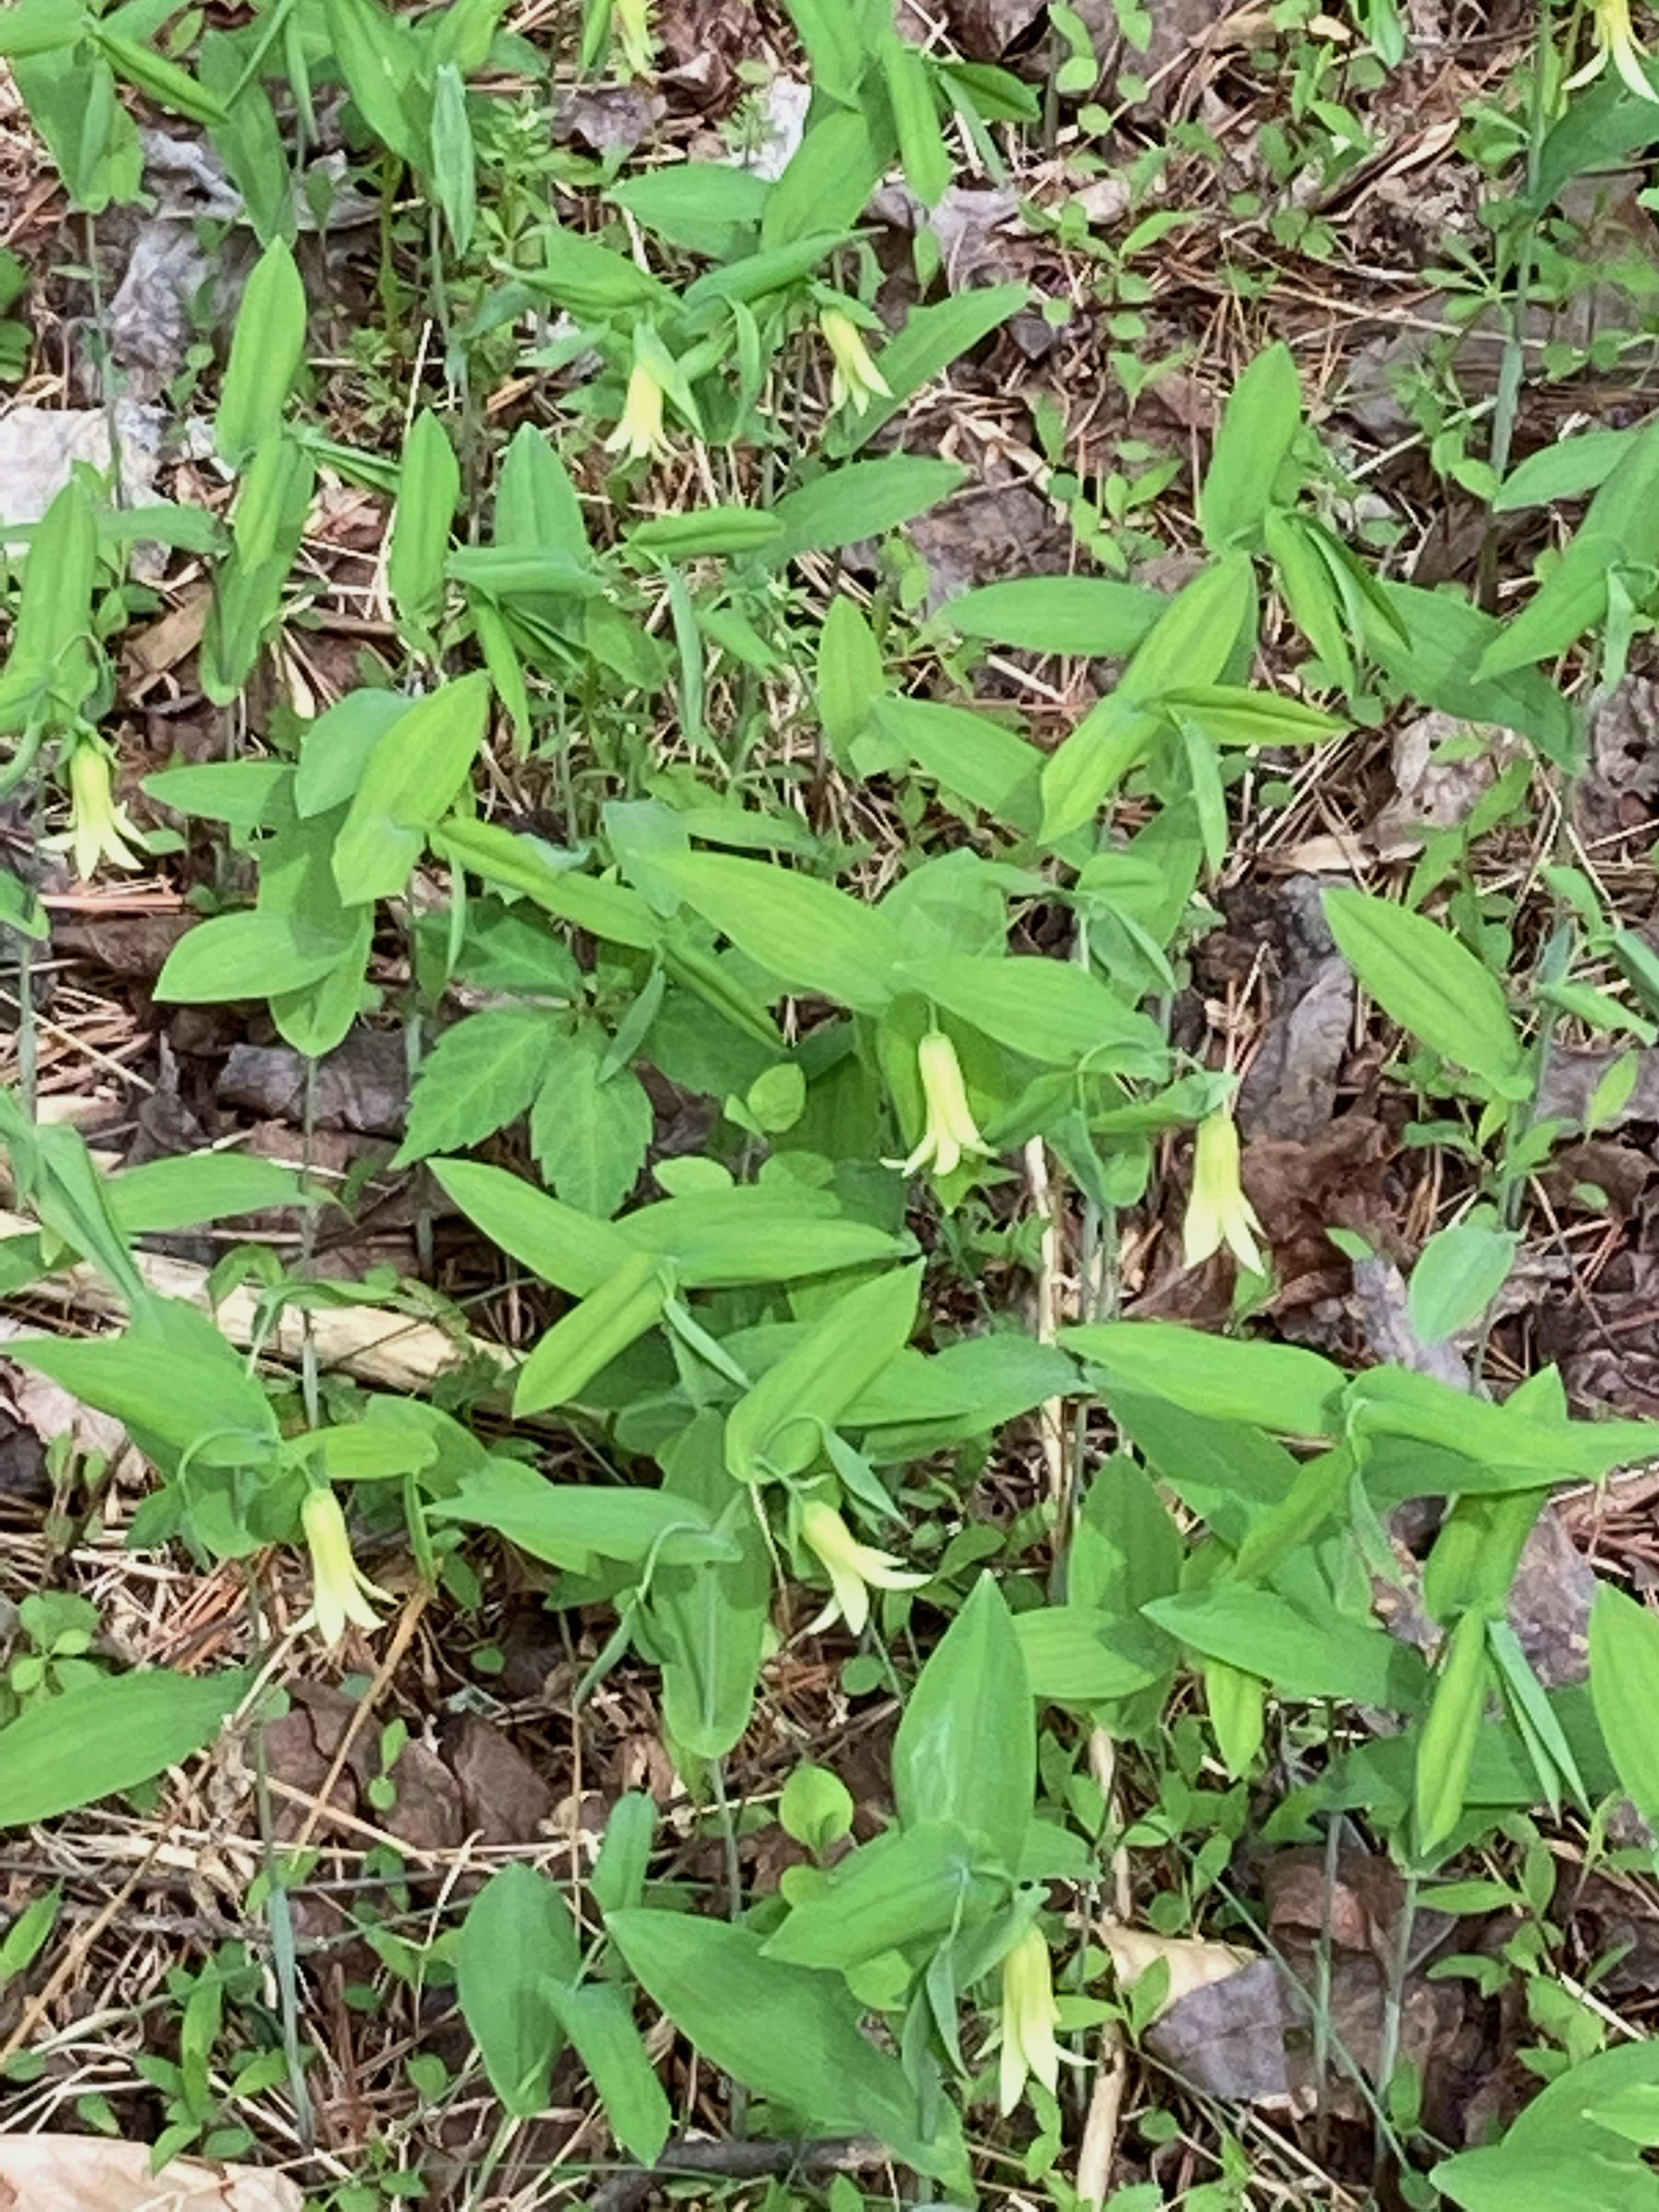 The Scientific Name is Uvularia perfoliata. You will likely hear them called Perfoliate Bellwort, Mealy Bellwort, Merrybells. This picture shows the A large patch. of Uvularia perfoliata